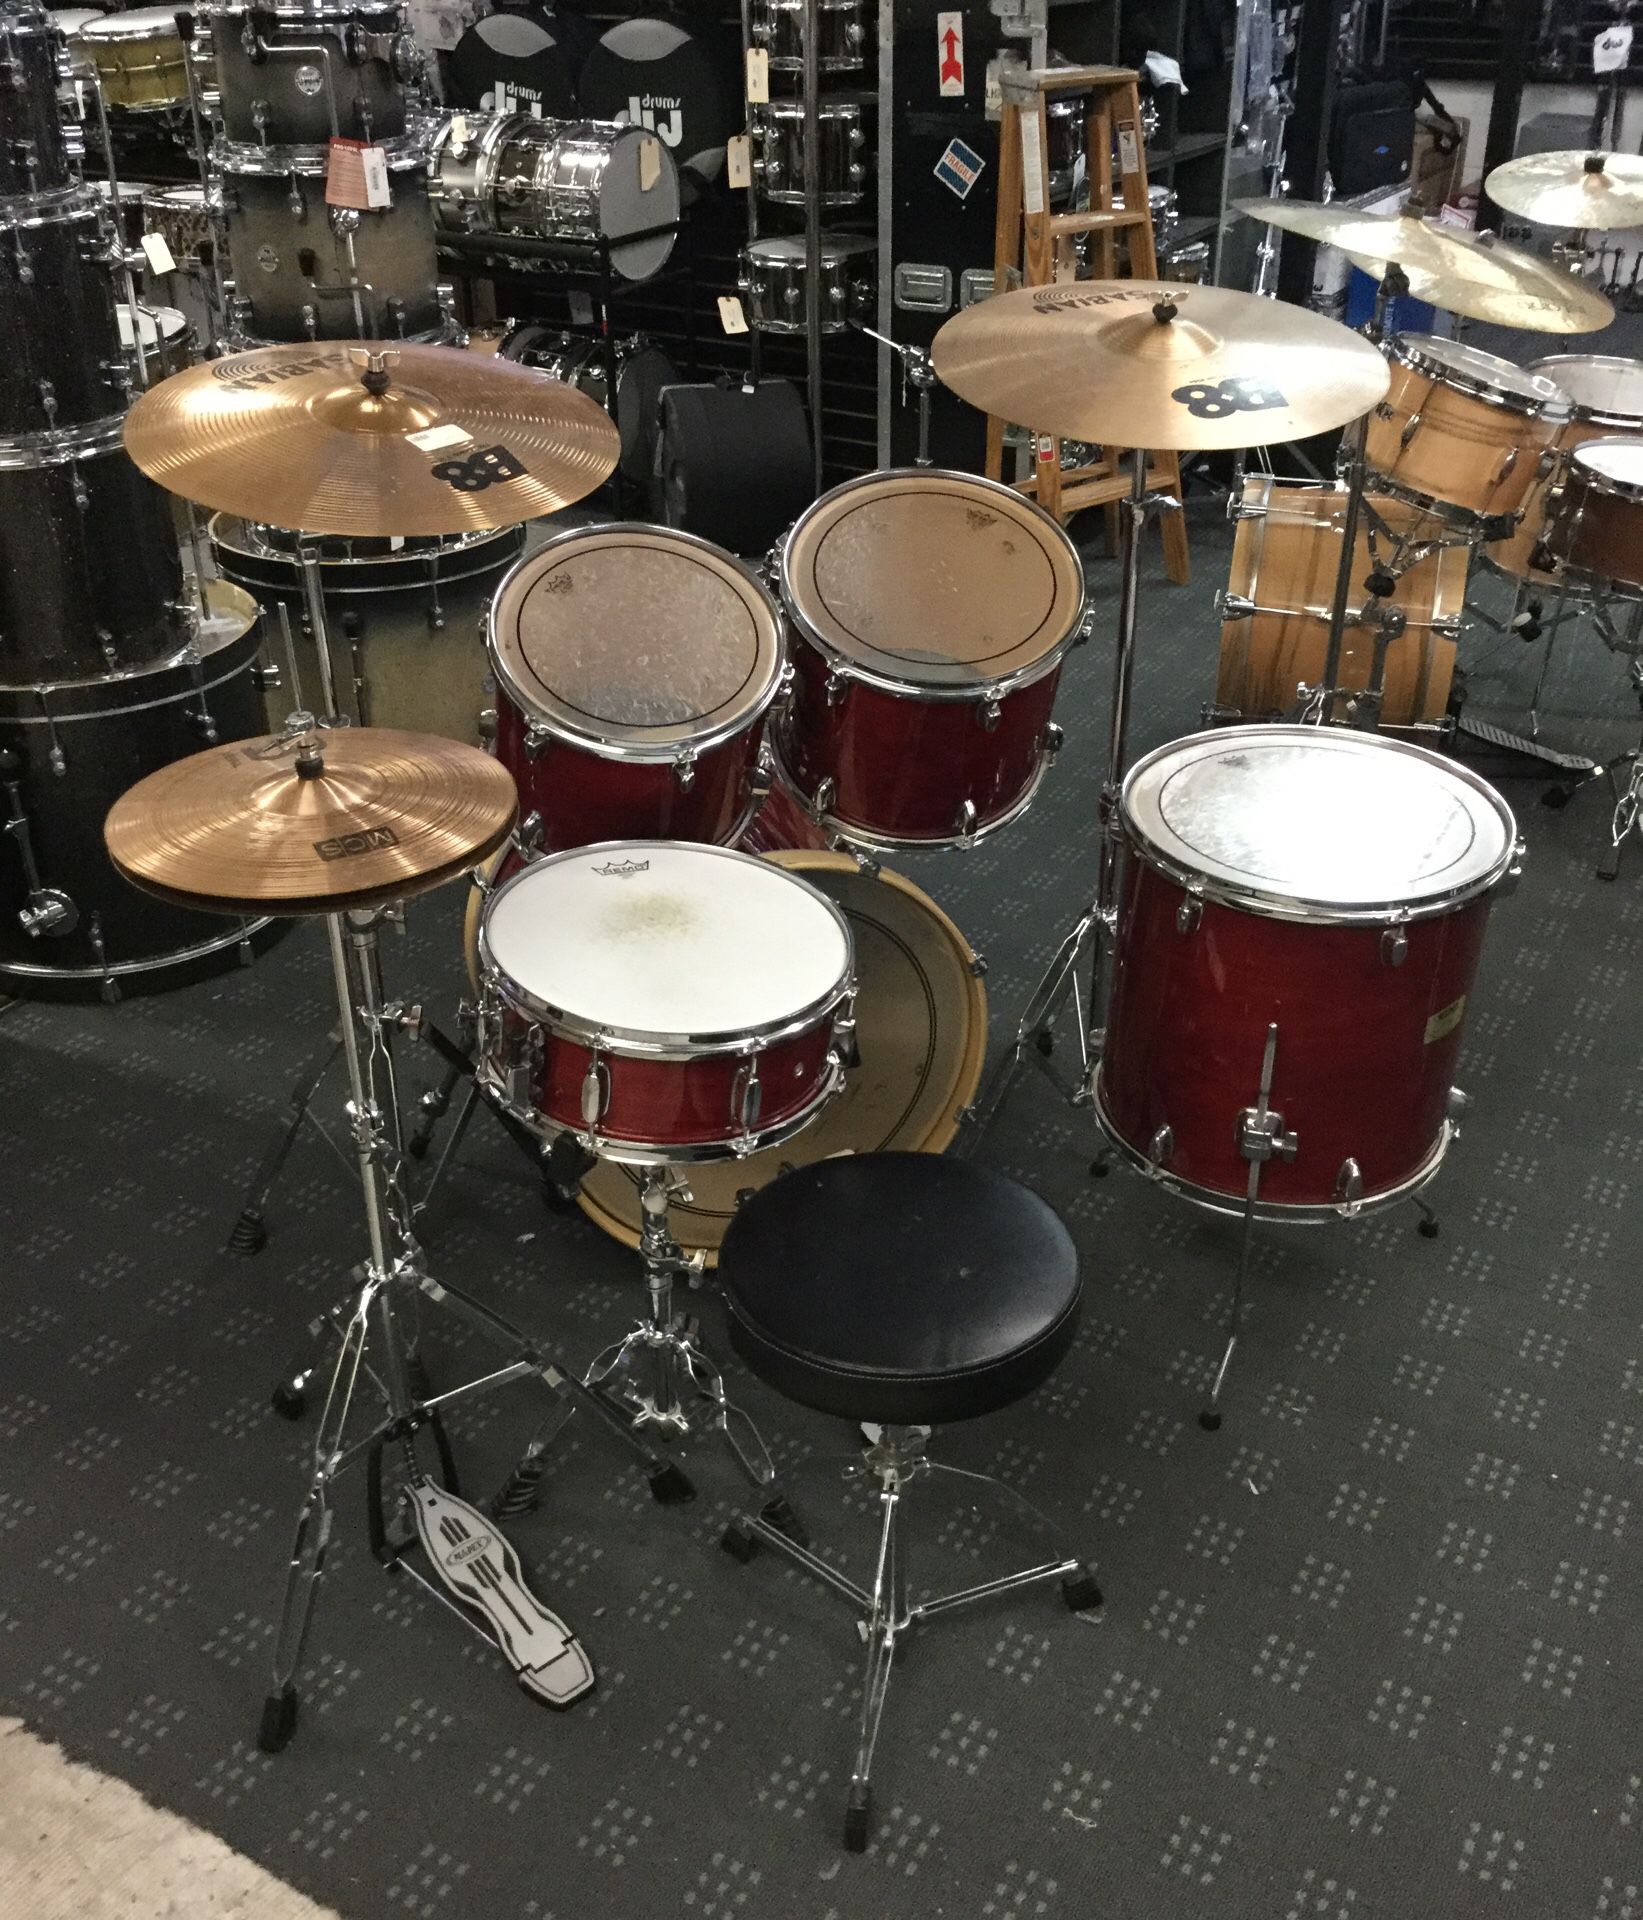 Mapex Pro M drum set complete with hardware & cymbals